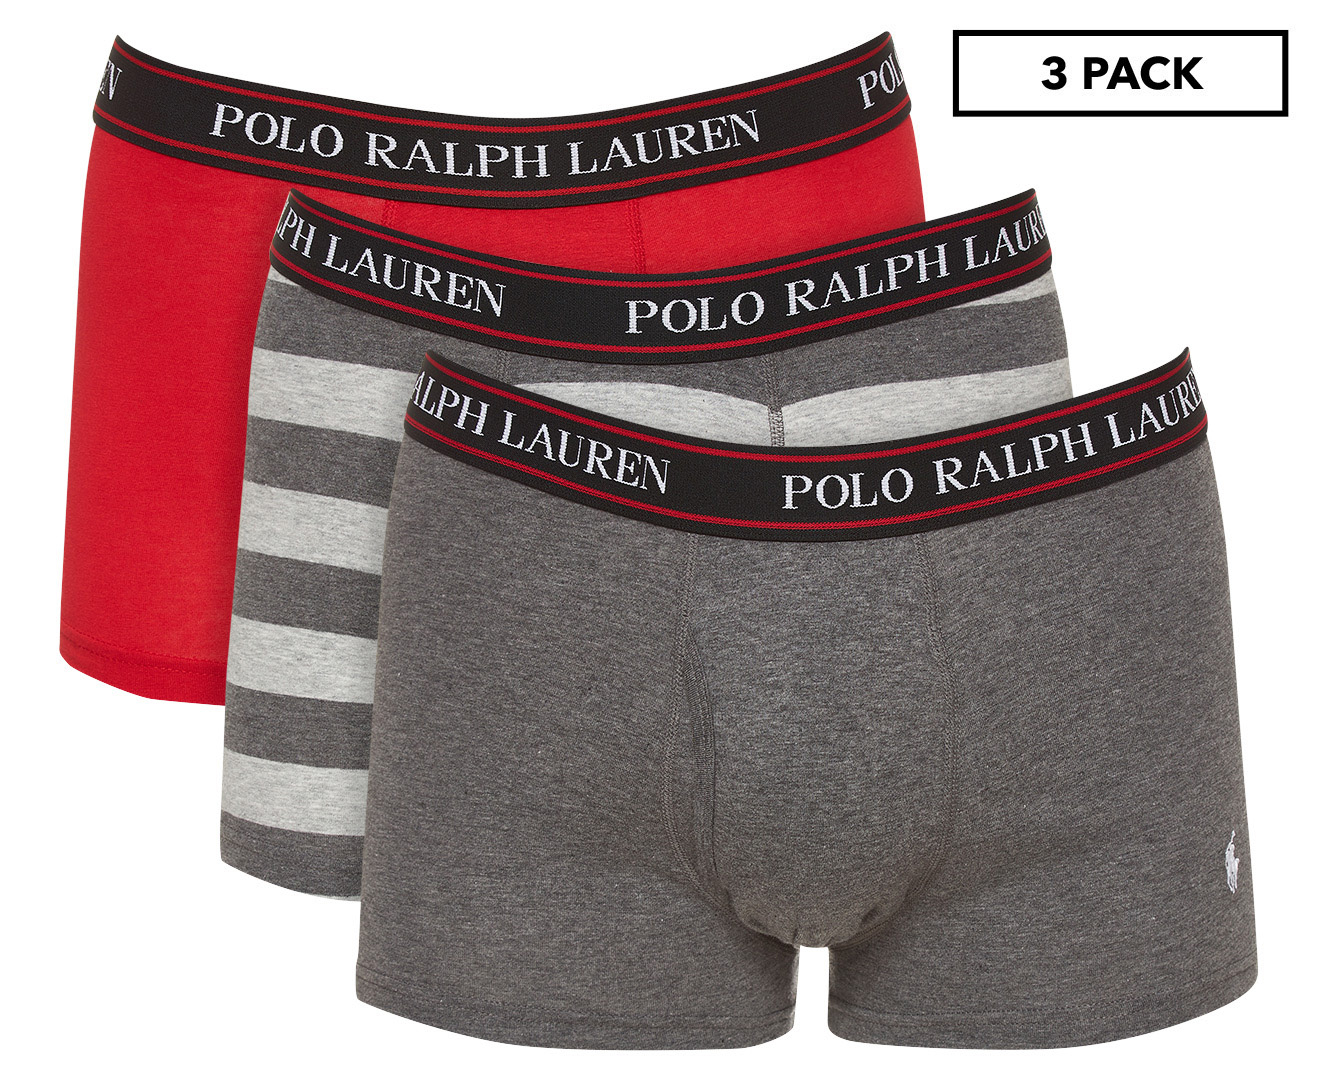 Polo Ralph Lauren Men's Stretch Classic Fit Trunks 3-Pack - Grey  Heather/Ruby